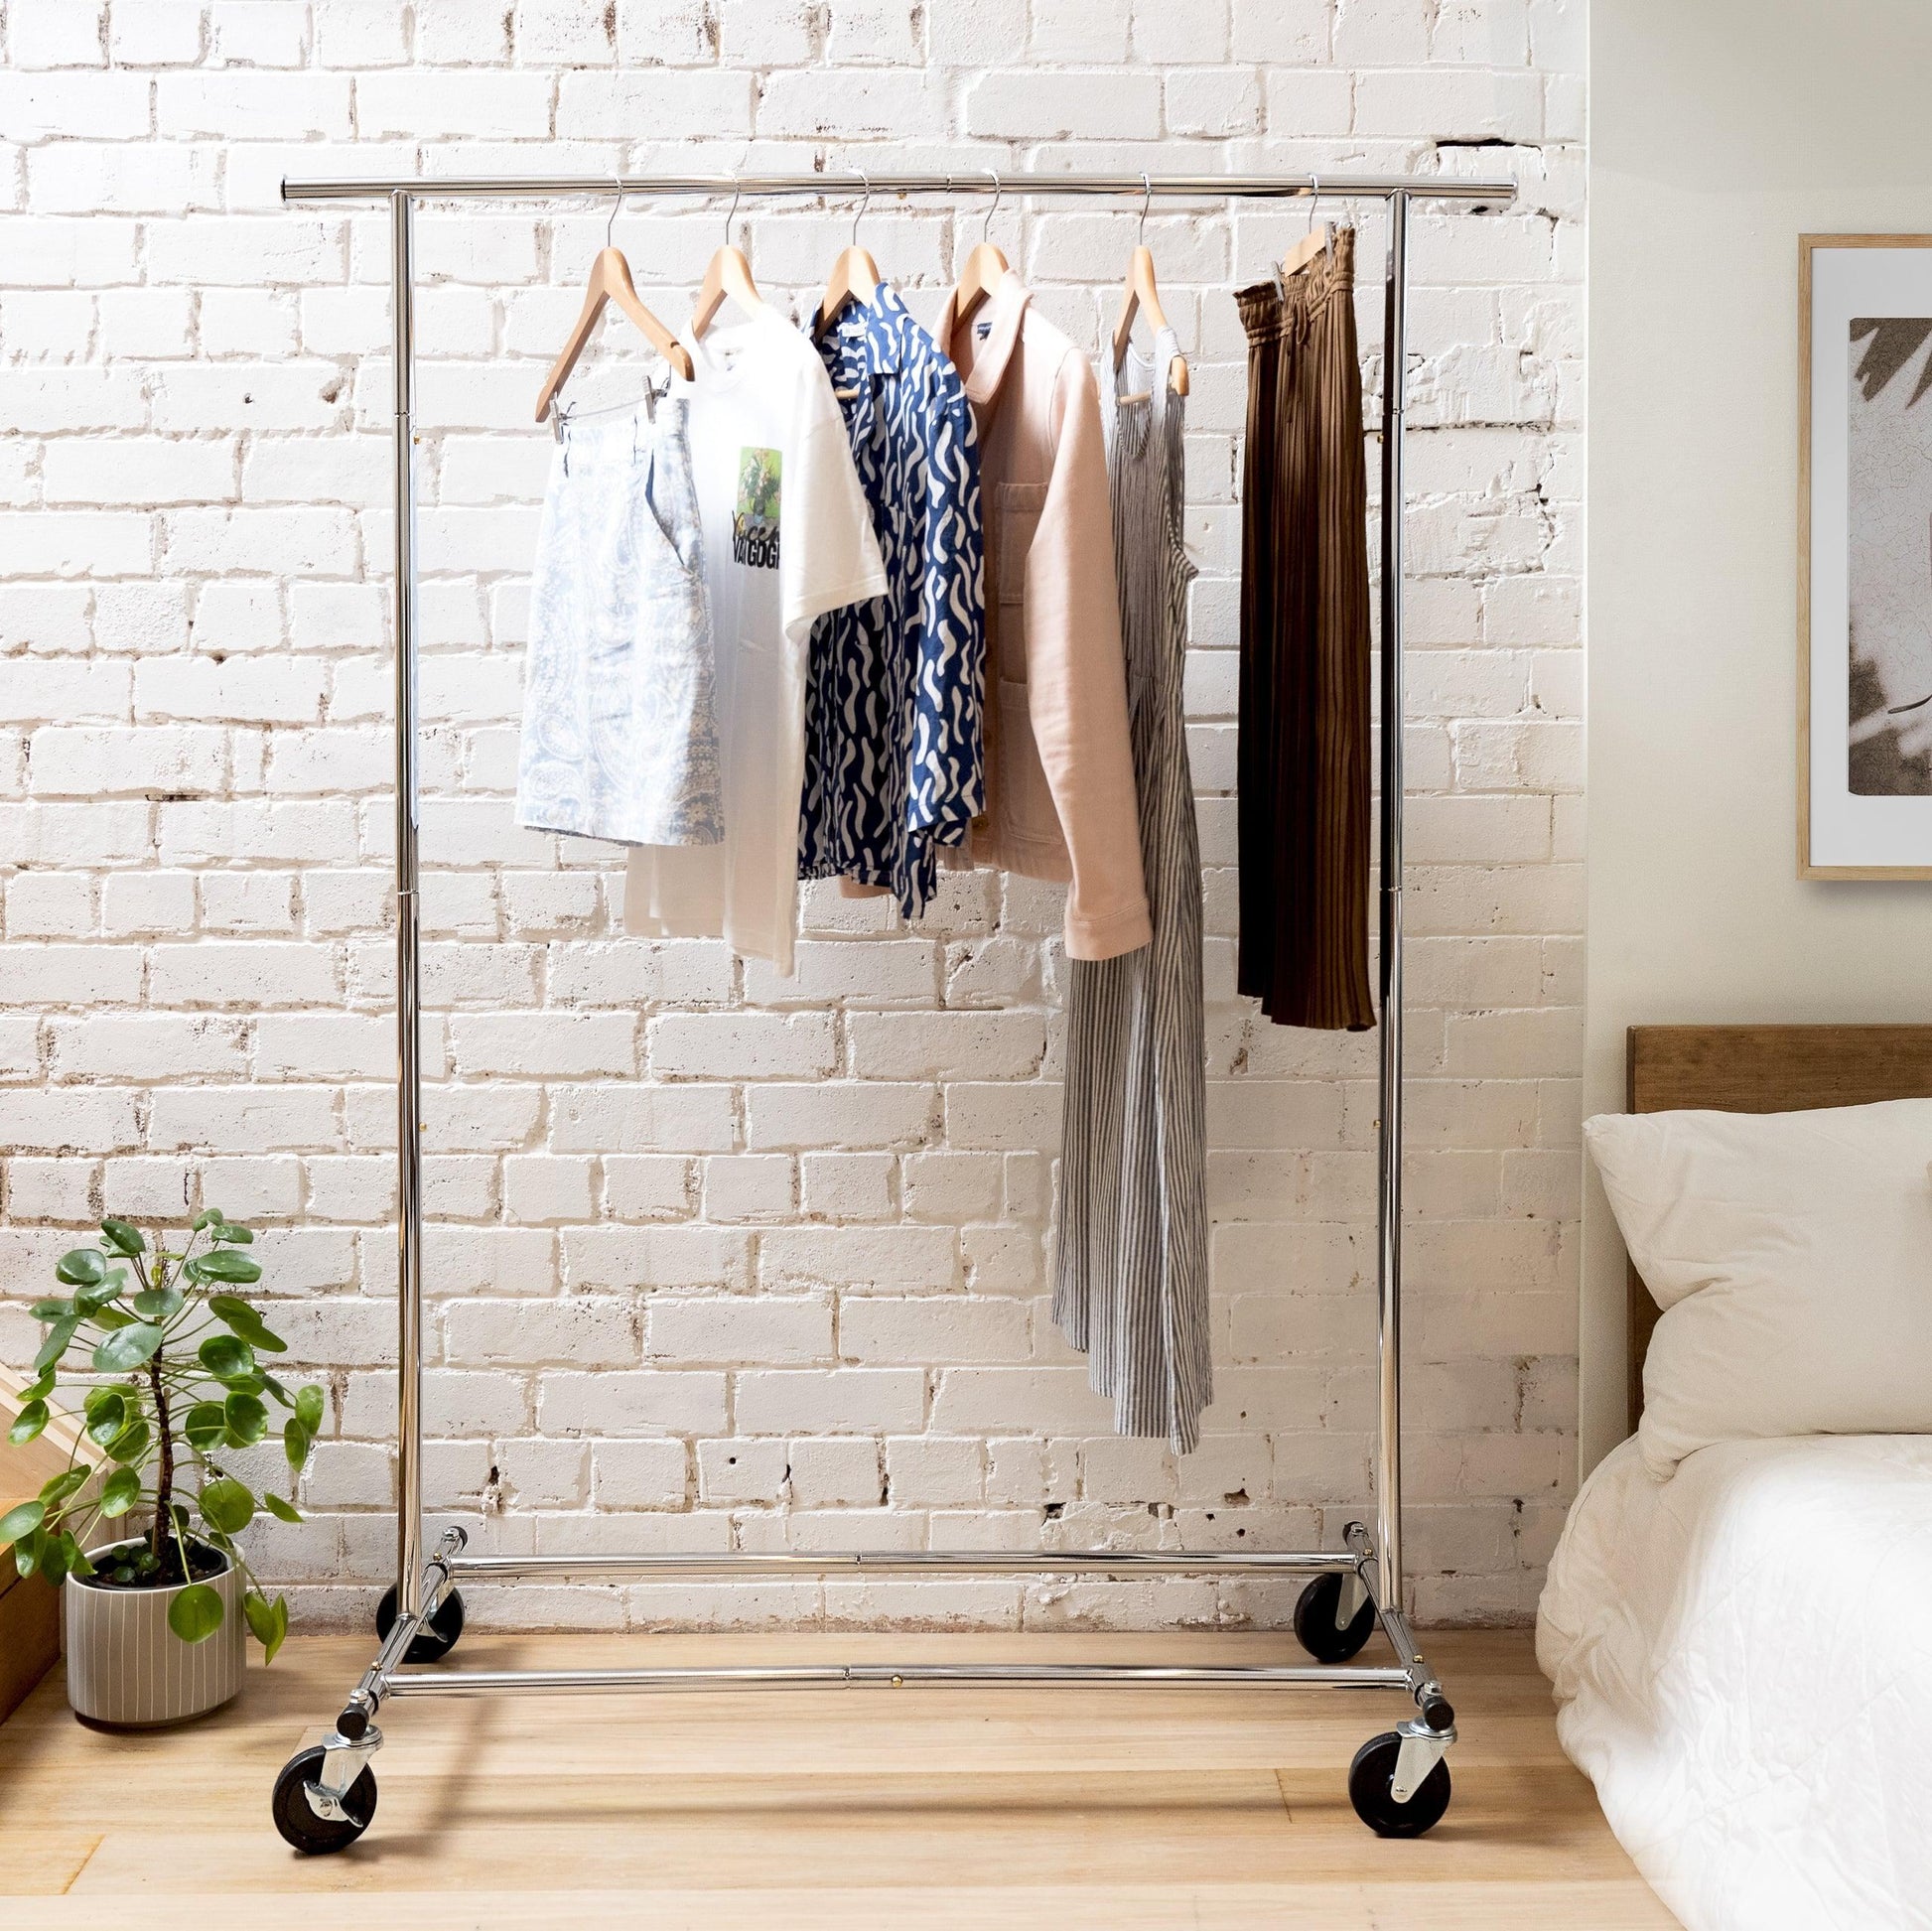 Heavy Duty Metal Clothes Rack -150kgs Weight Capacity - Four Large Rubber Casters - Hangersforless